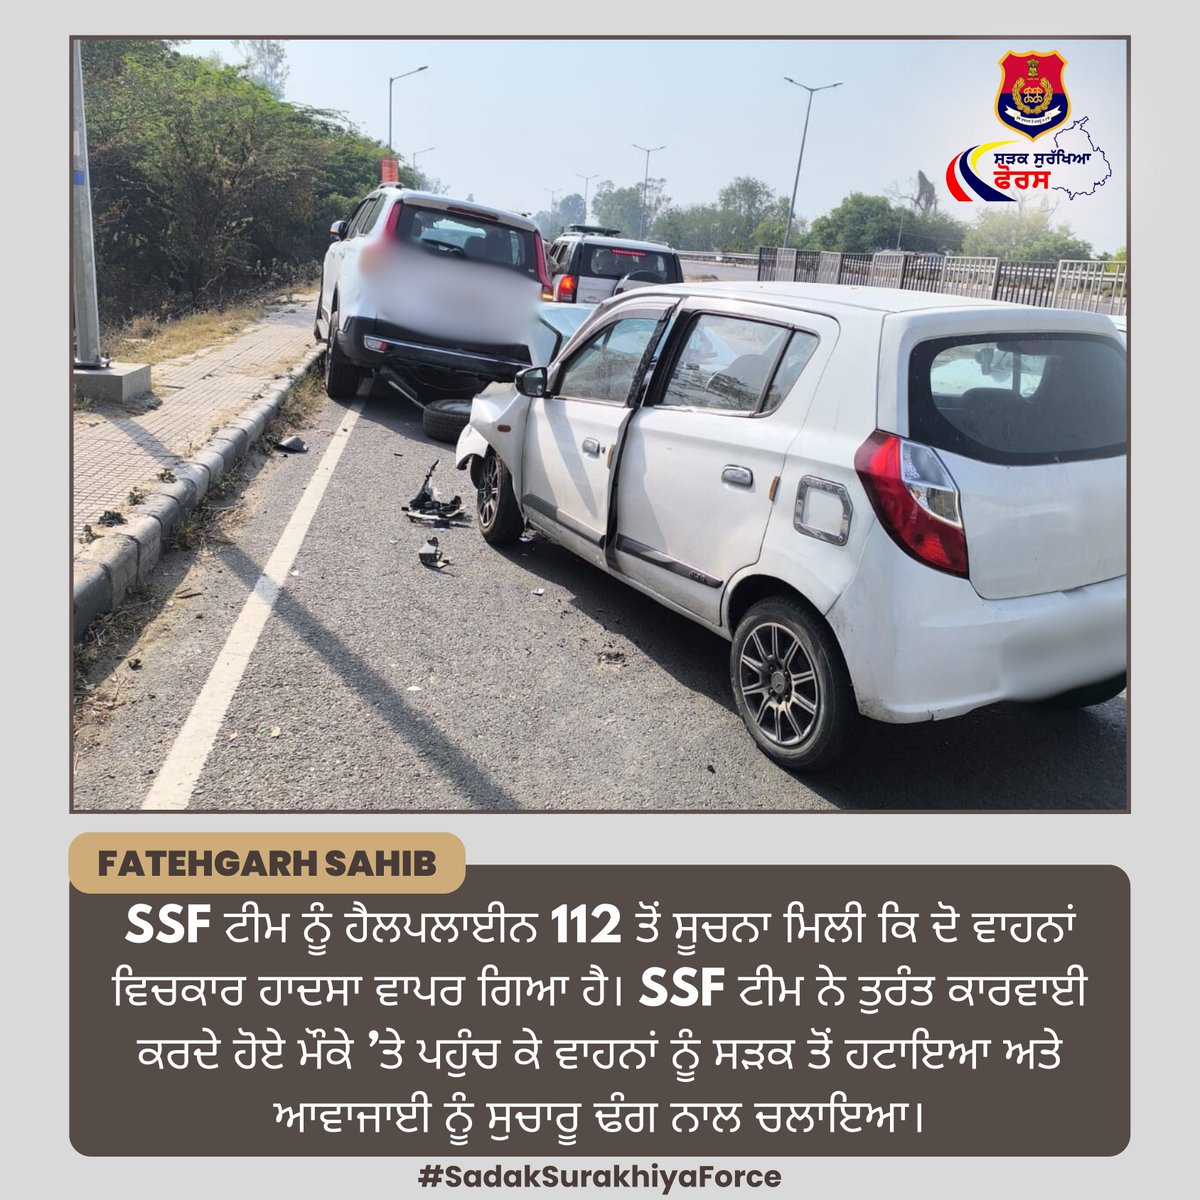 Sri Fatehgarh Sahib Police SSF team received information from #Helpline112 about an accident involving two vehicles. #SSF team took immediate action, arrived at the scene, removed the vehicles from the road, and made traffic flow smoothly. #sadaksurakhiyaforce